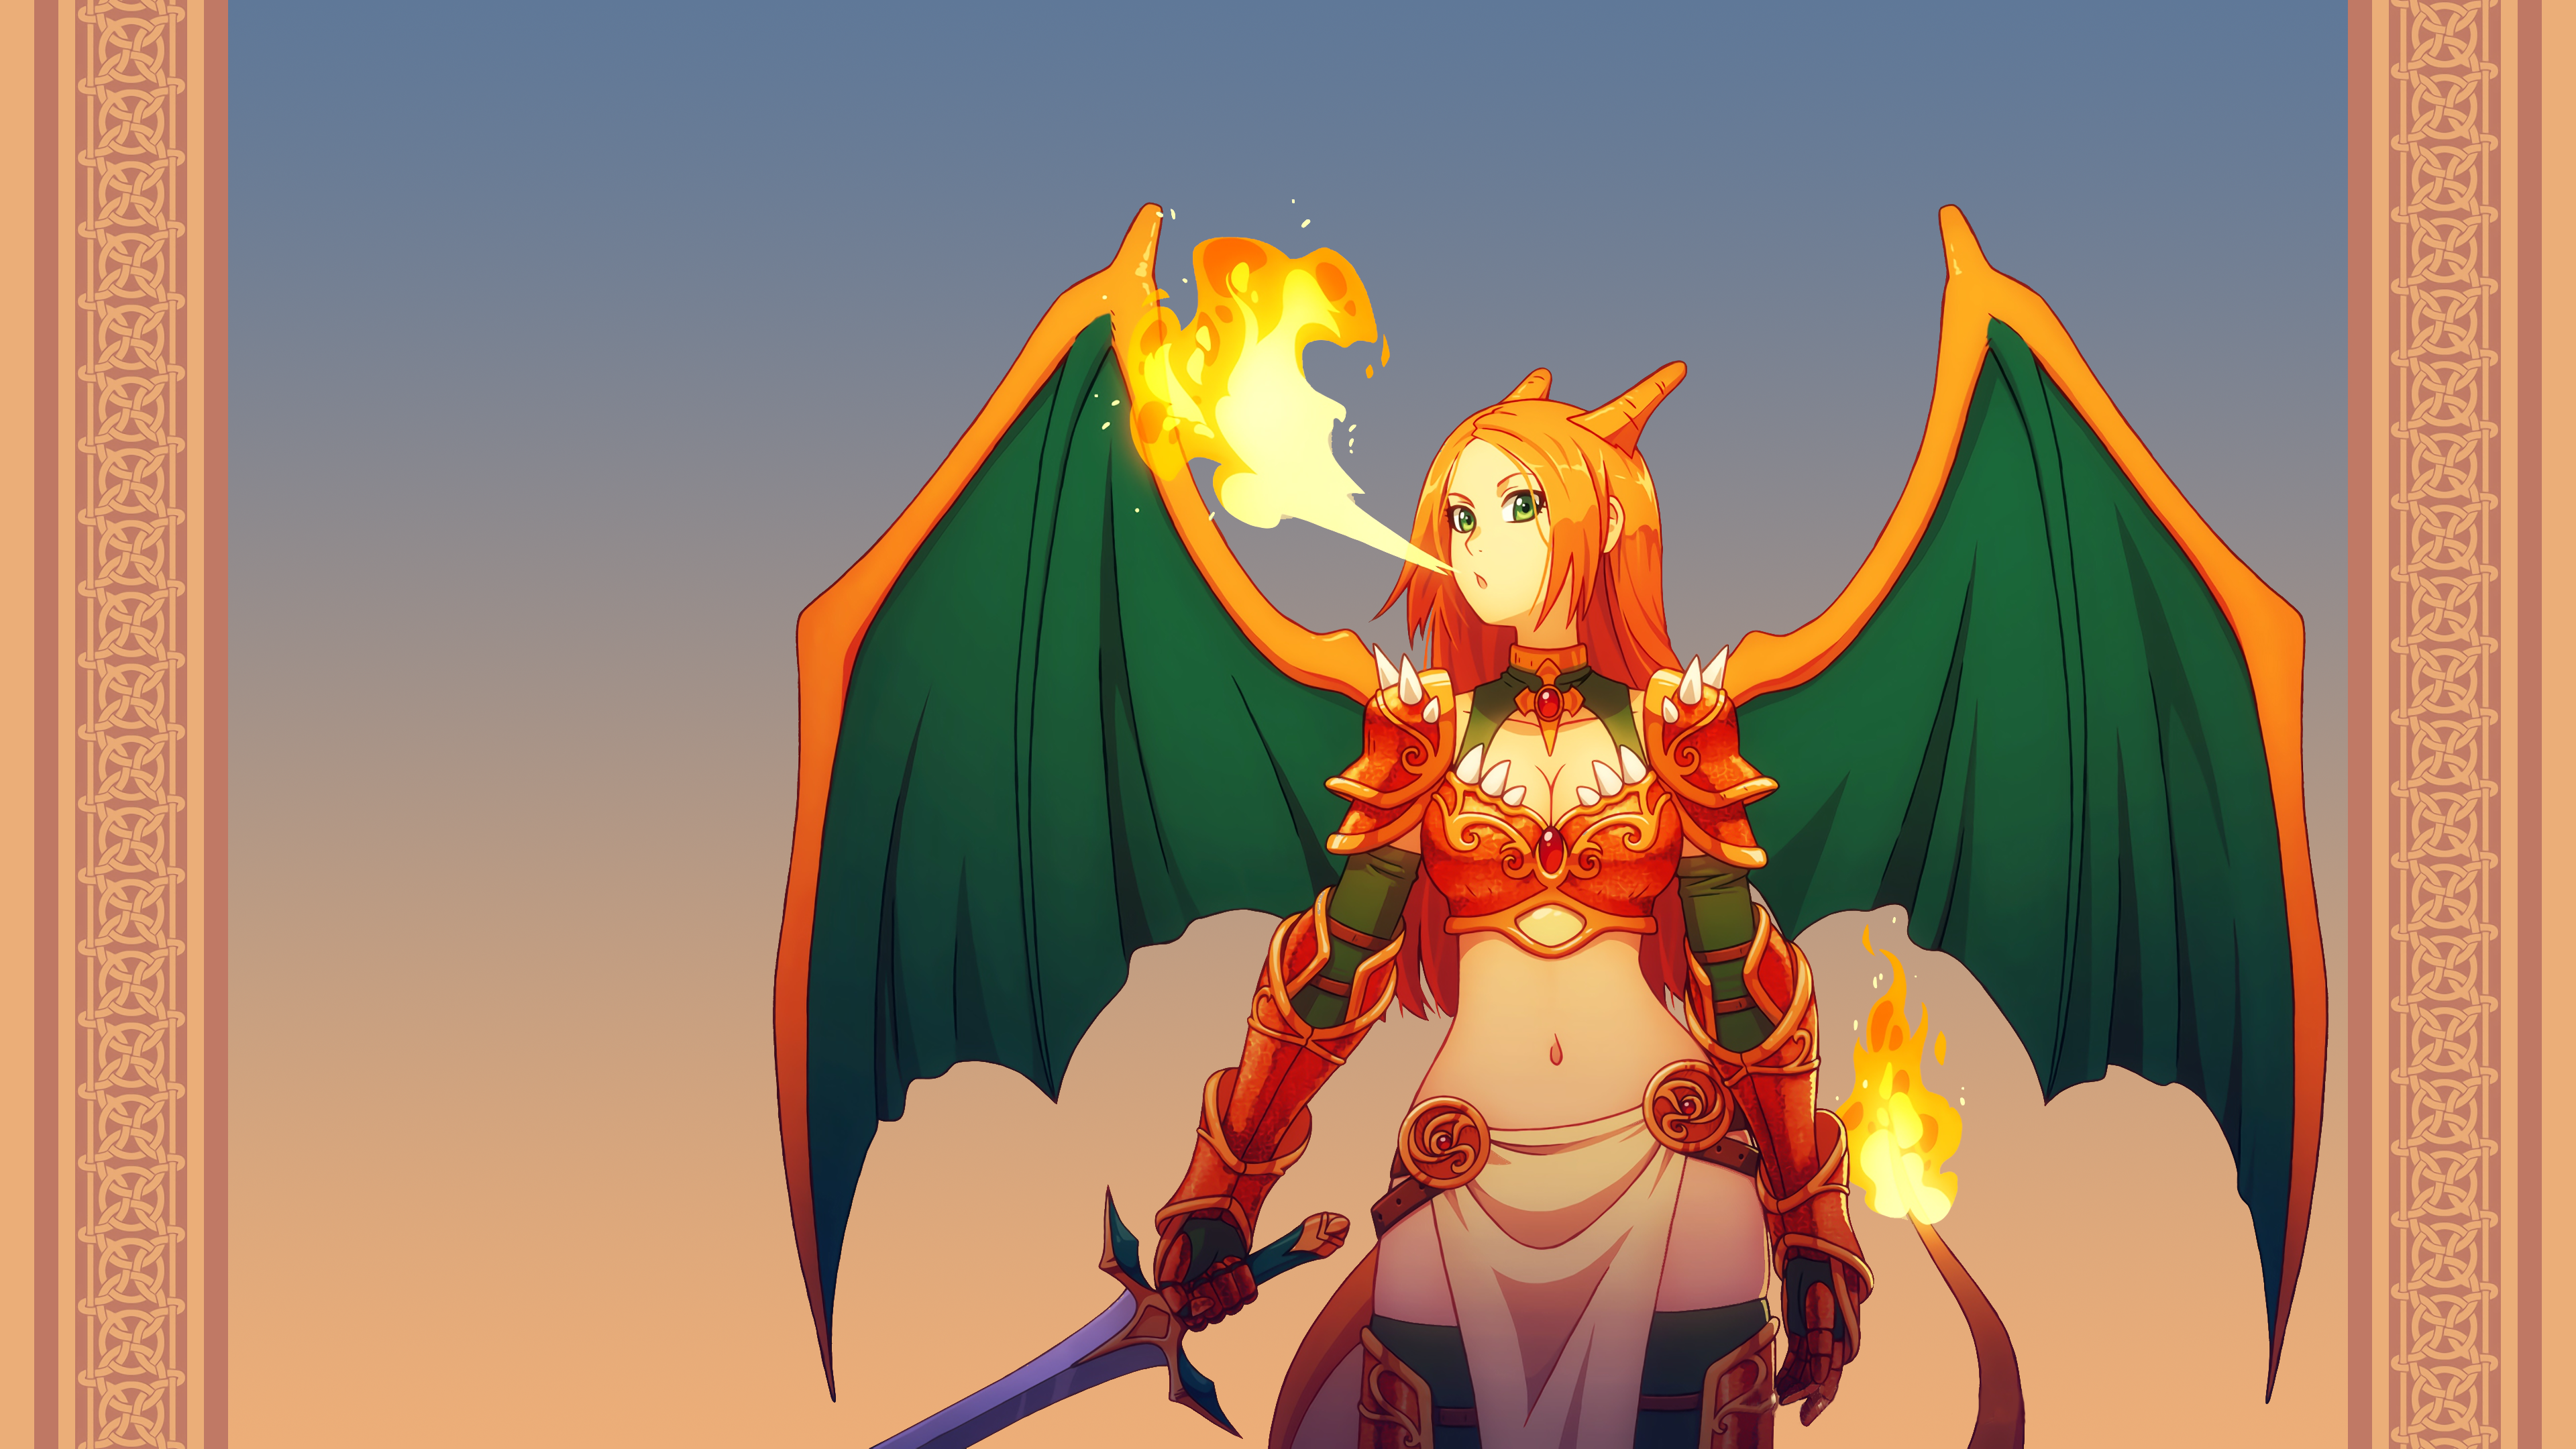 Anime 3840x2160 Pokémon Charizard anime girls anime fire boobs cleavage belly fantasy art fantasy girl sword weapon wings gradient simple background standing horns green eyes armored